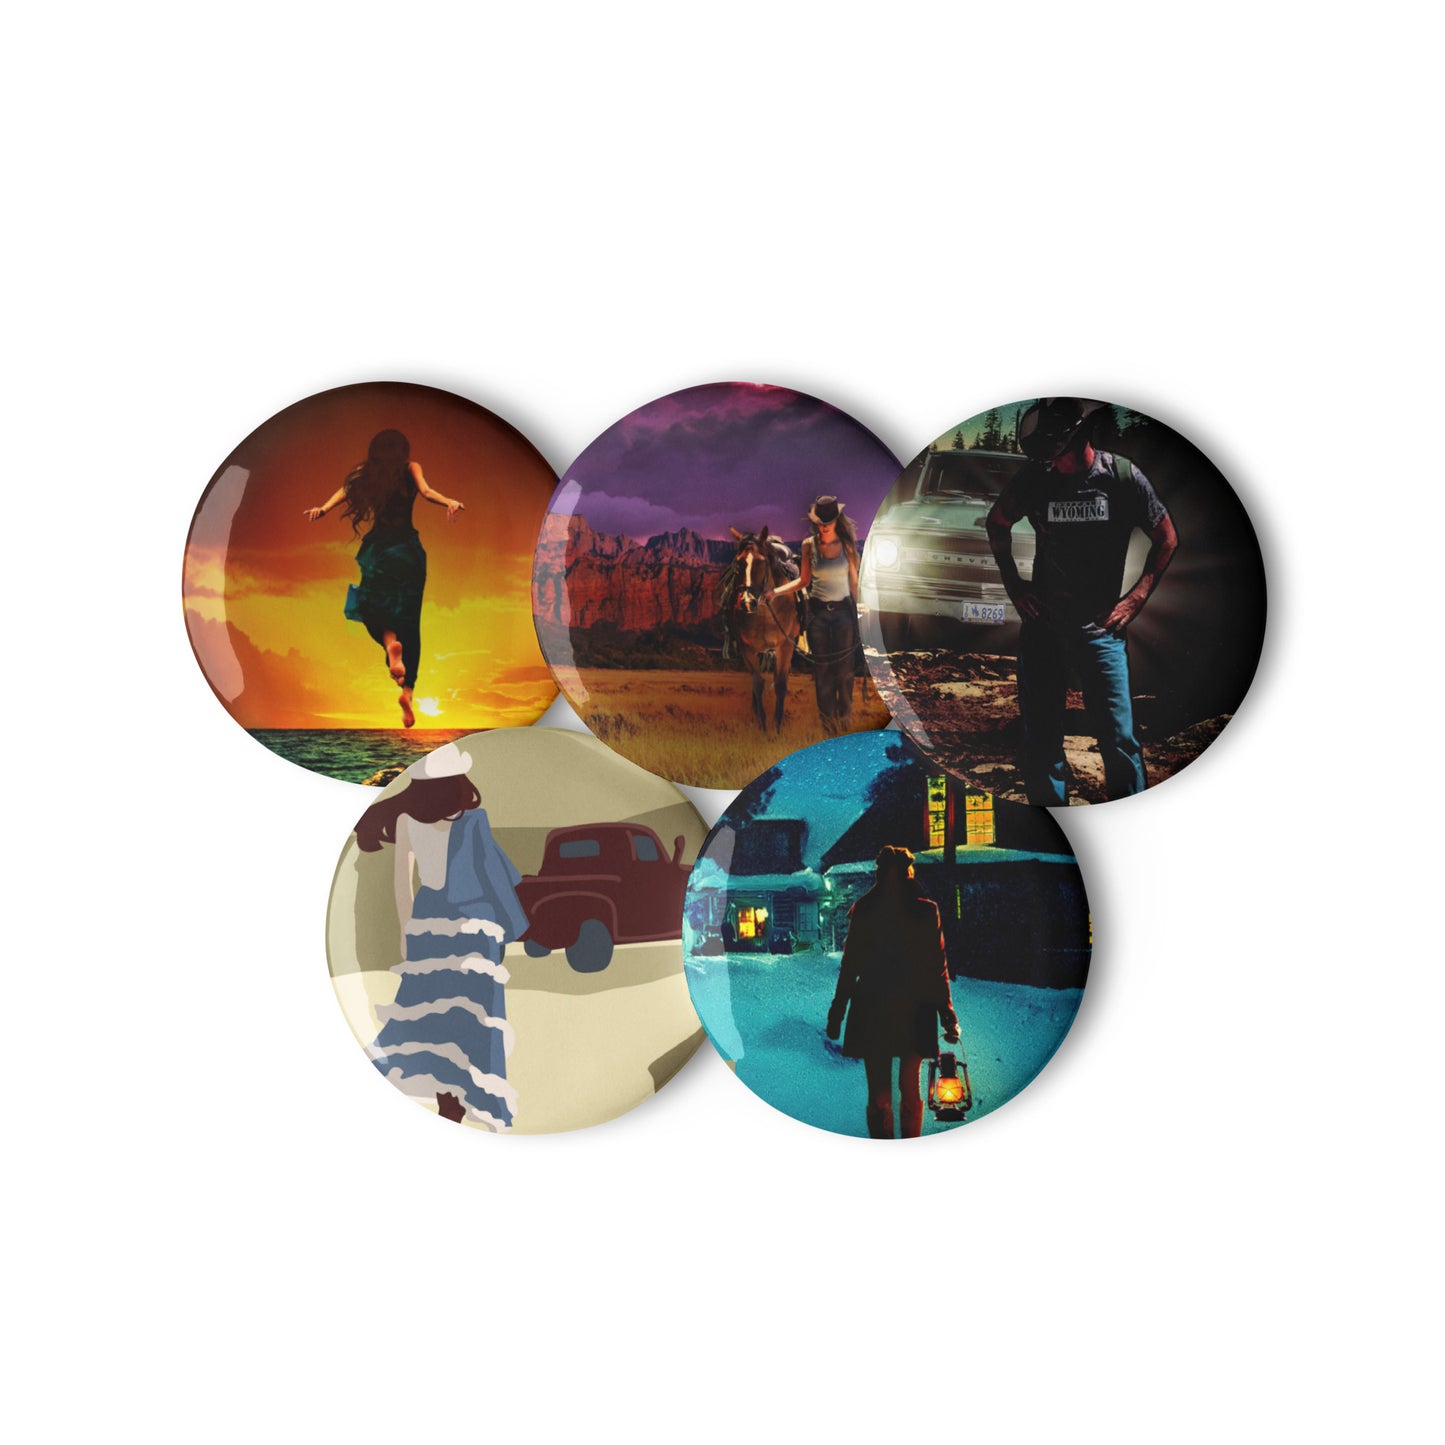 Set of PFH Book Pin Buttons